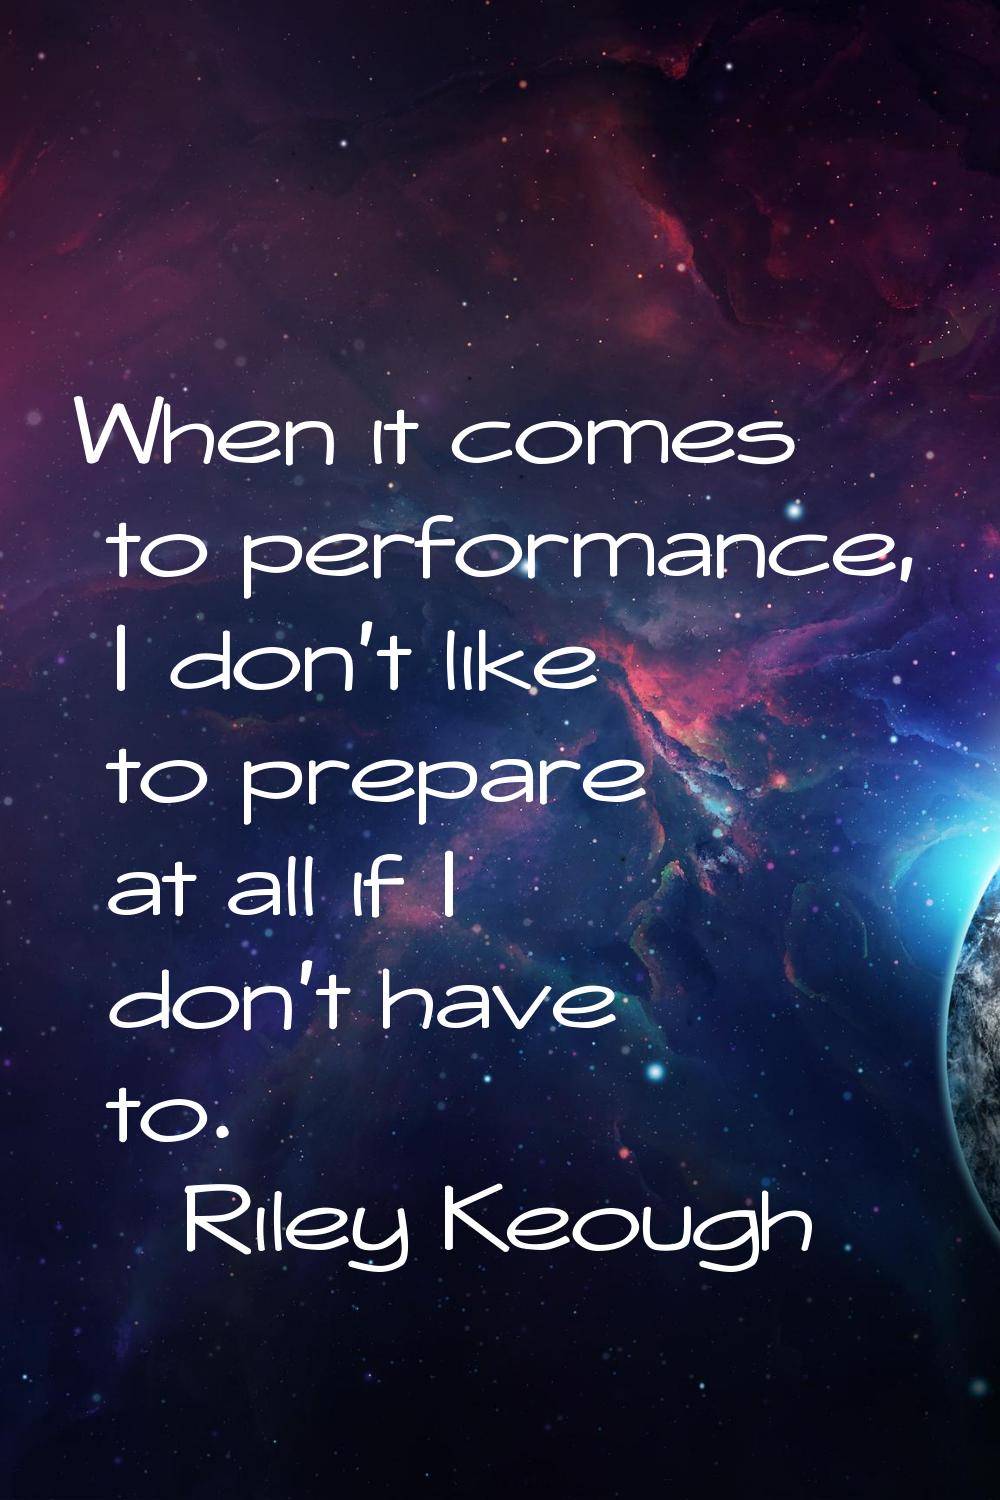 When it comes to performance, I don't like to prepare at all if I don't have to.